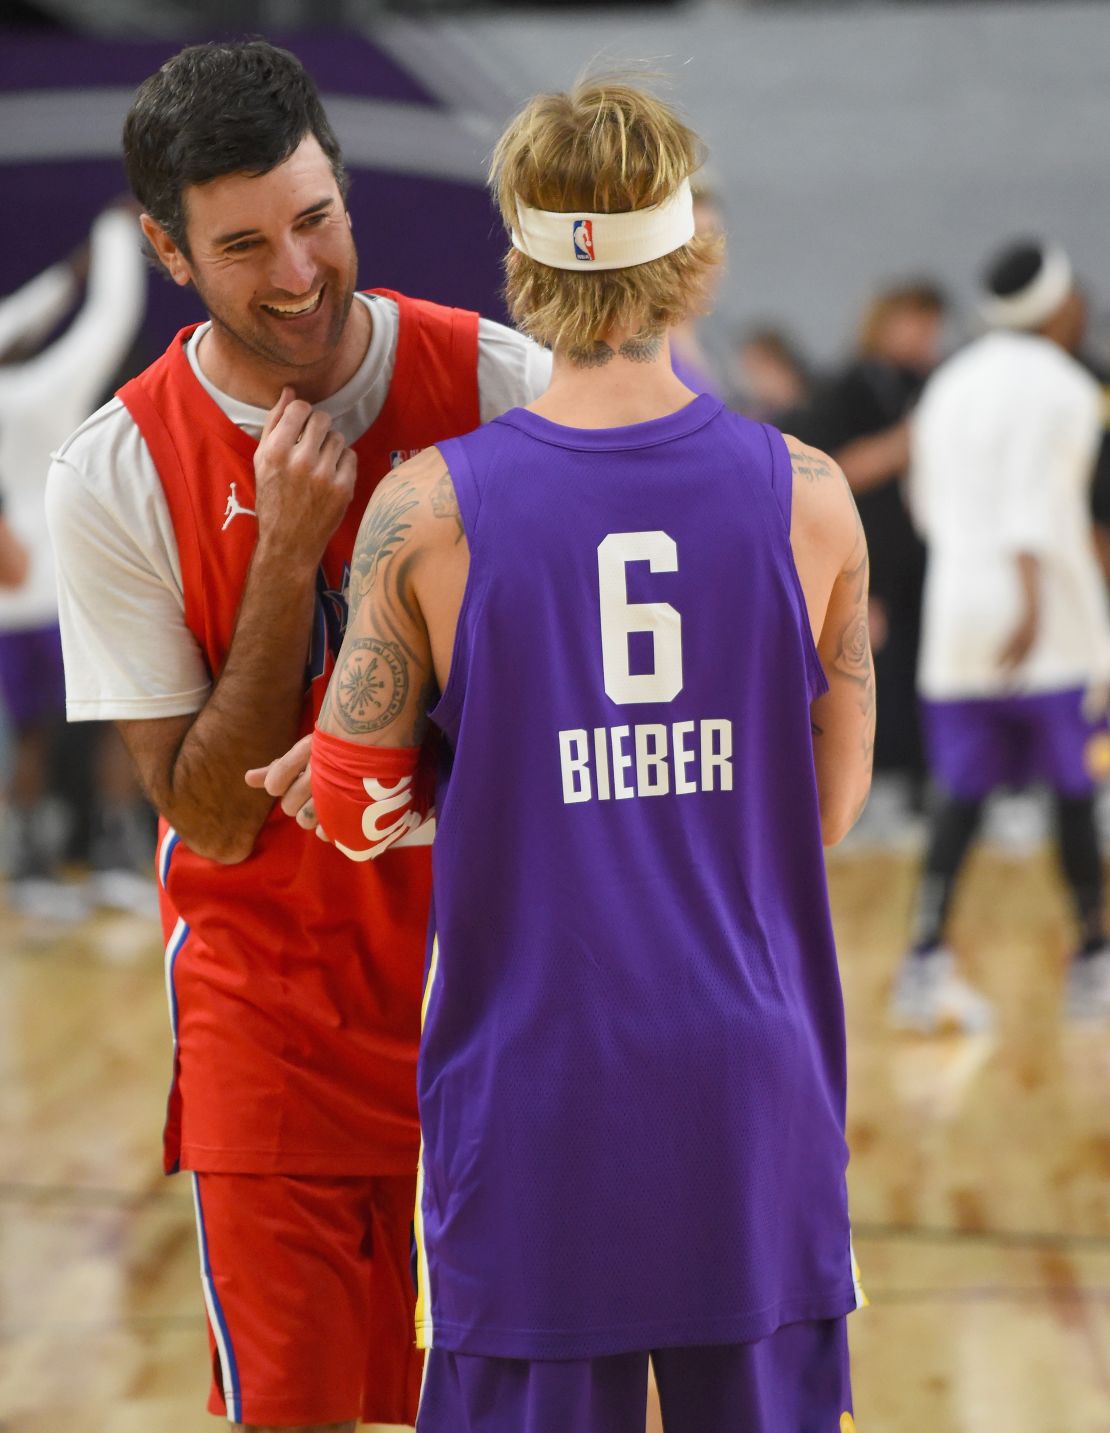 Bubba Watson has a laugh with Justin Bieber during warm-up prior to the 2018 NBA All-Star Celebrity Game at Los Angeles Convention Center.